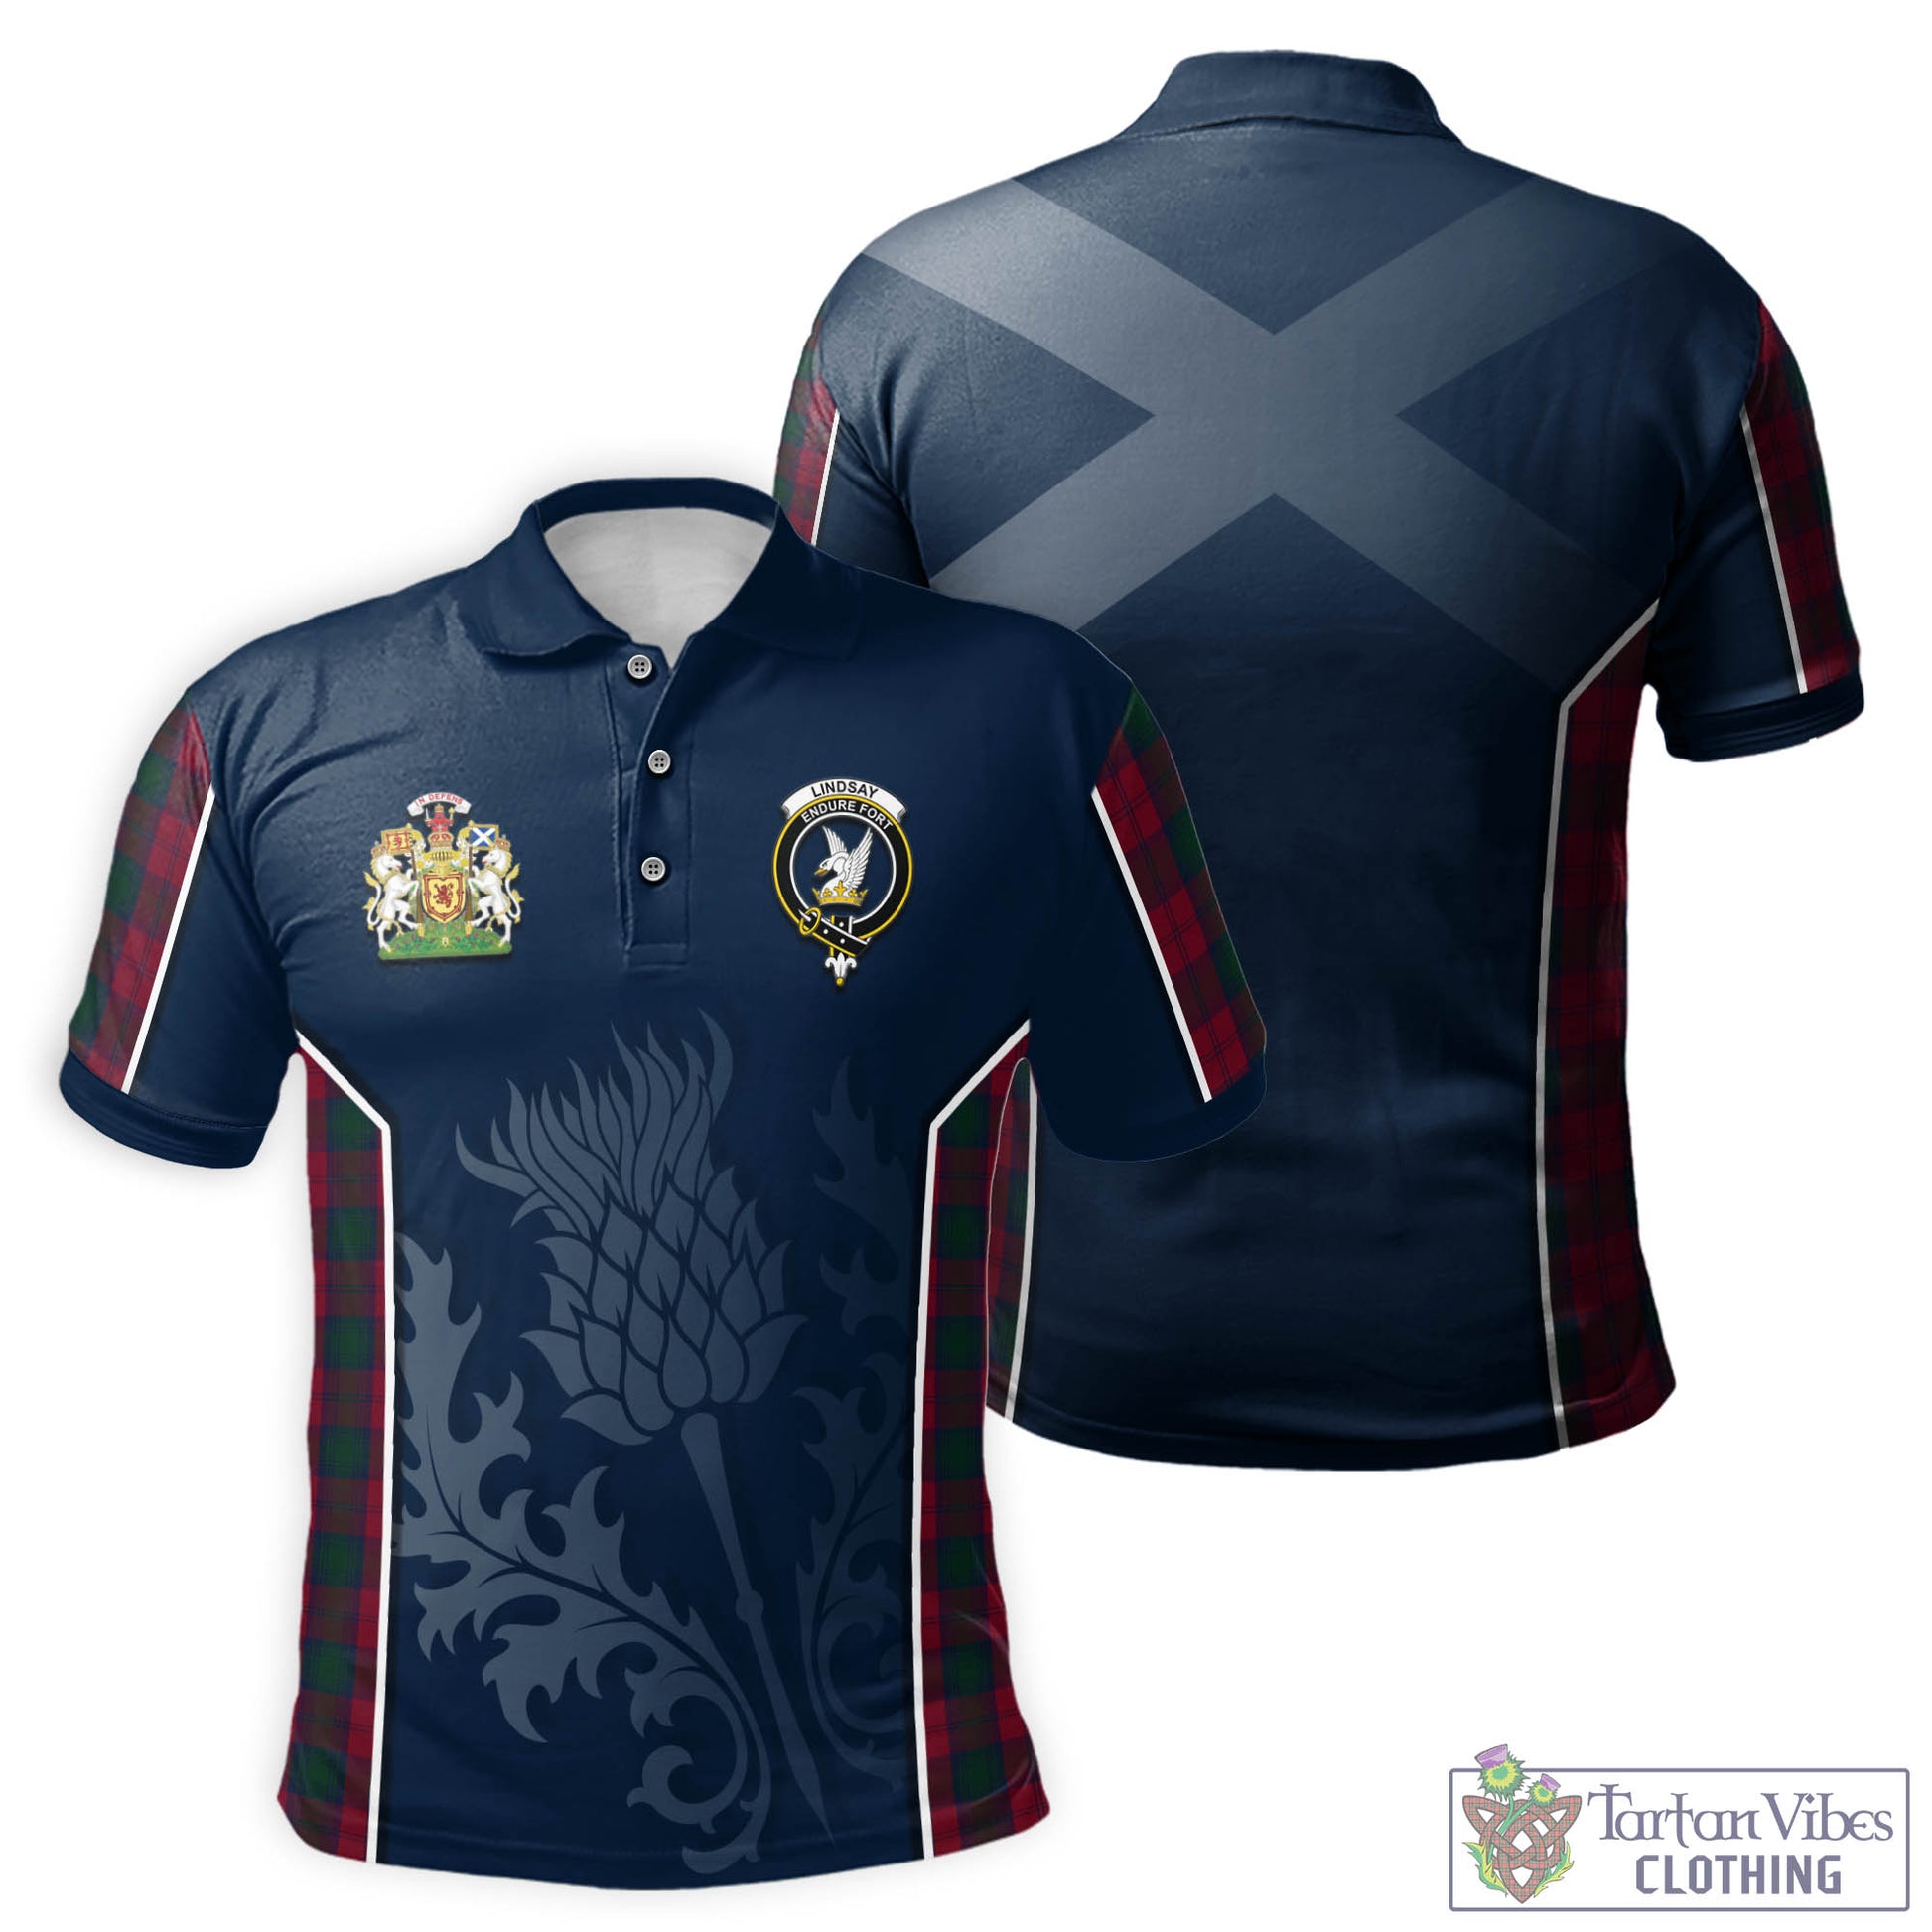 Tartan Vibes Clothing Lindsay Tartan Men's Polo Shirt with Family Crest and Scottish Thistle Vibes Sport Style